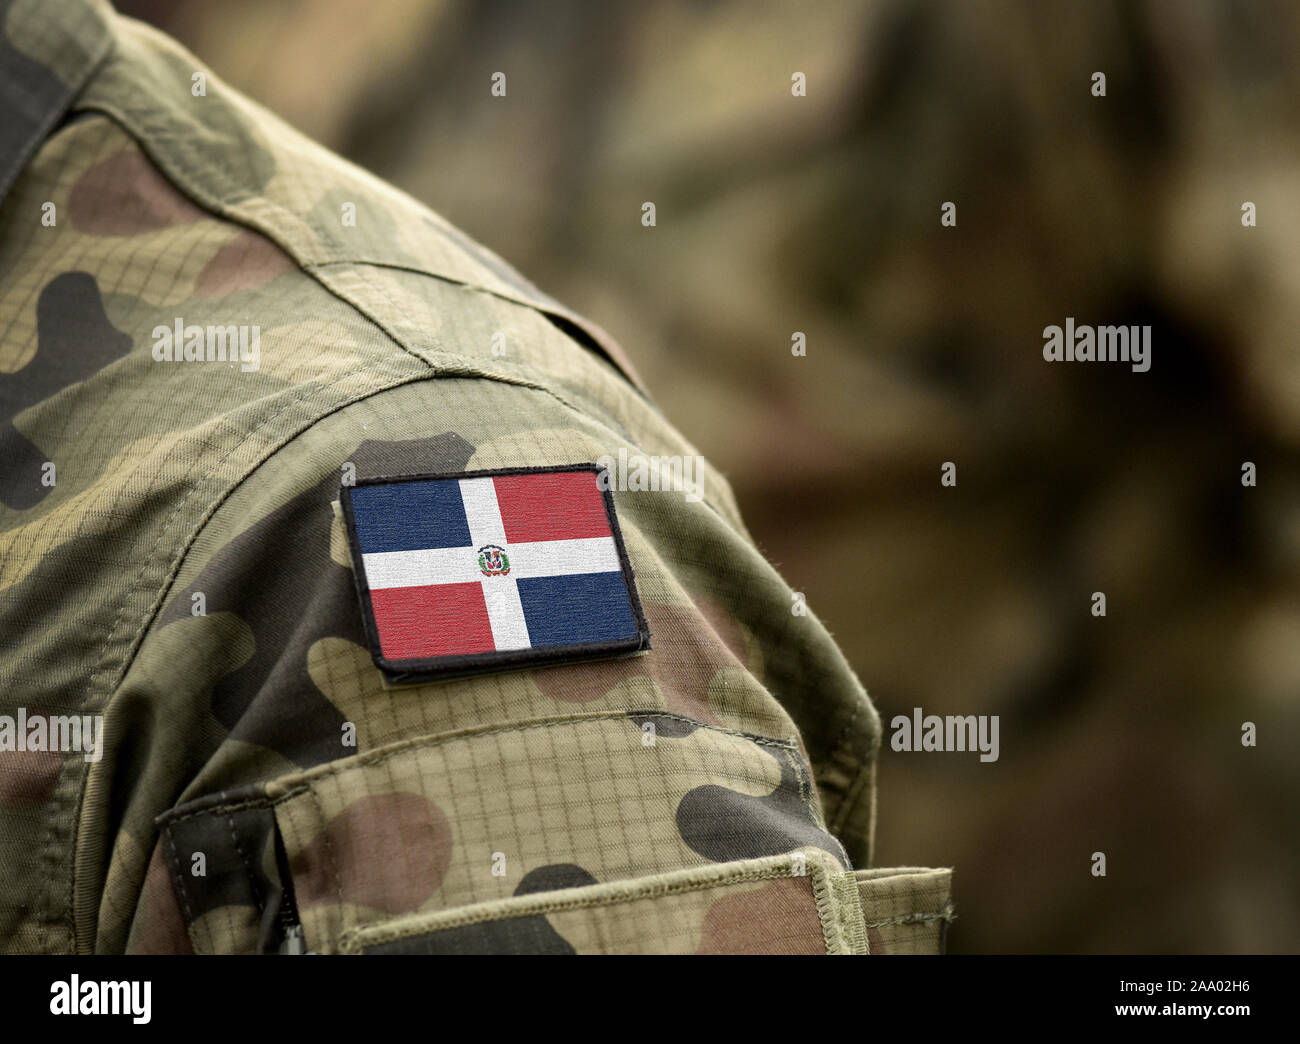 Flag of Dominican Republic on military uniform. Army, armed forces, soldiers. Collage. Stock Photo